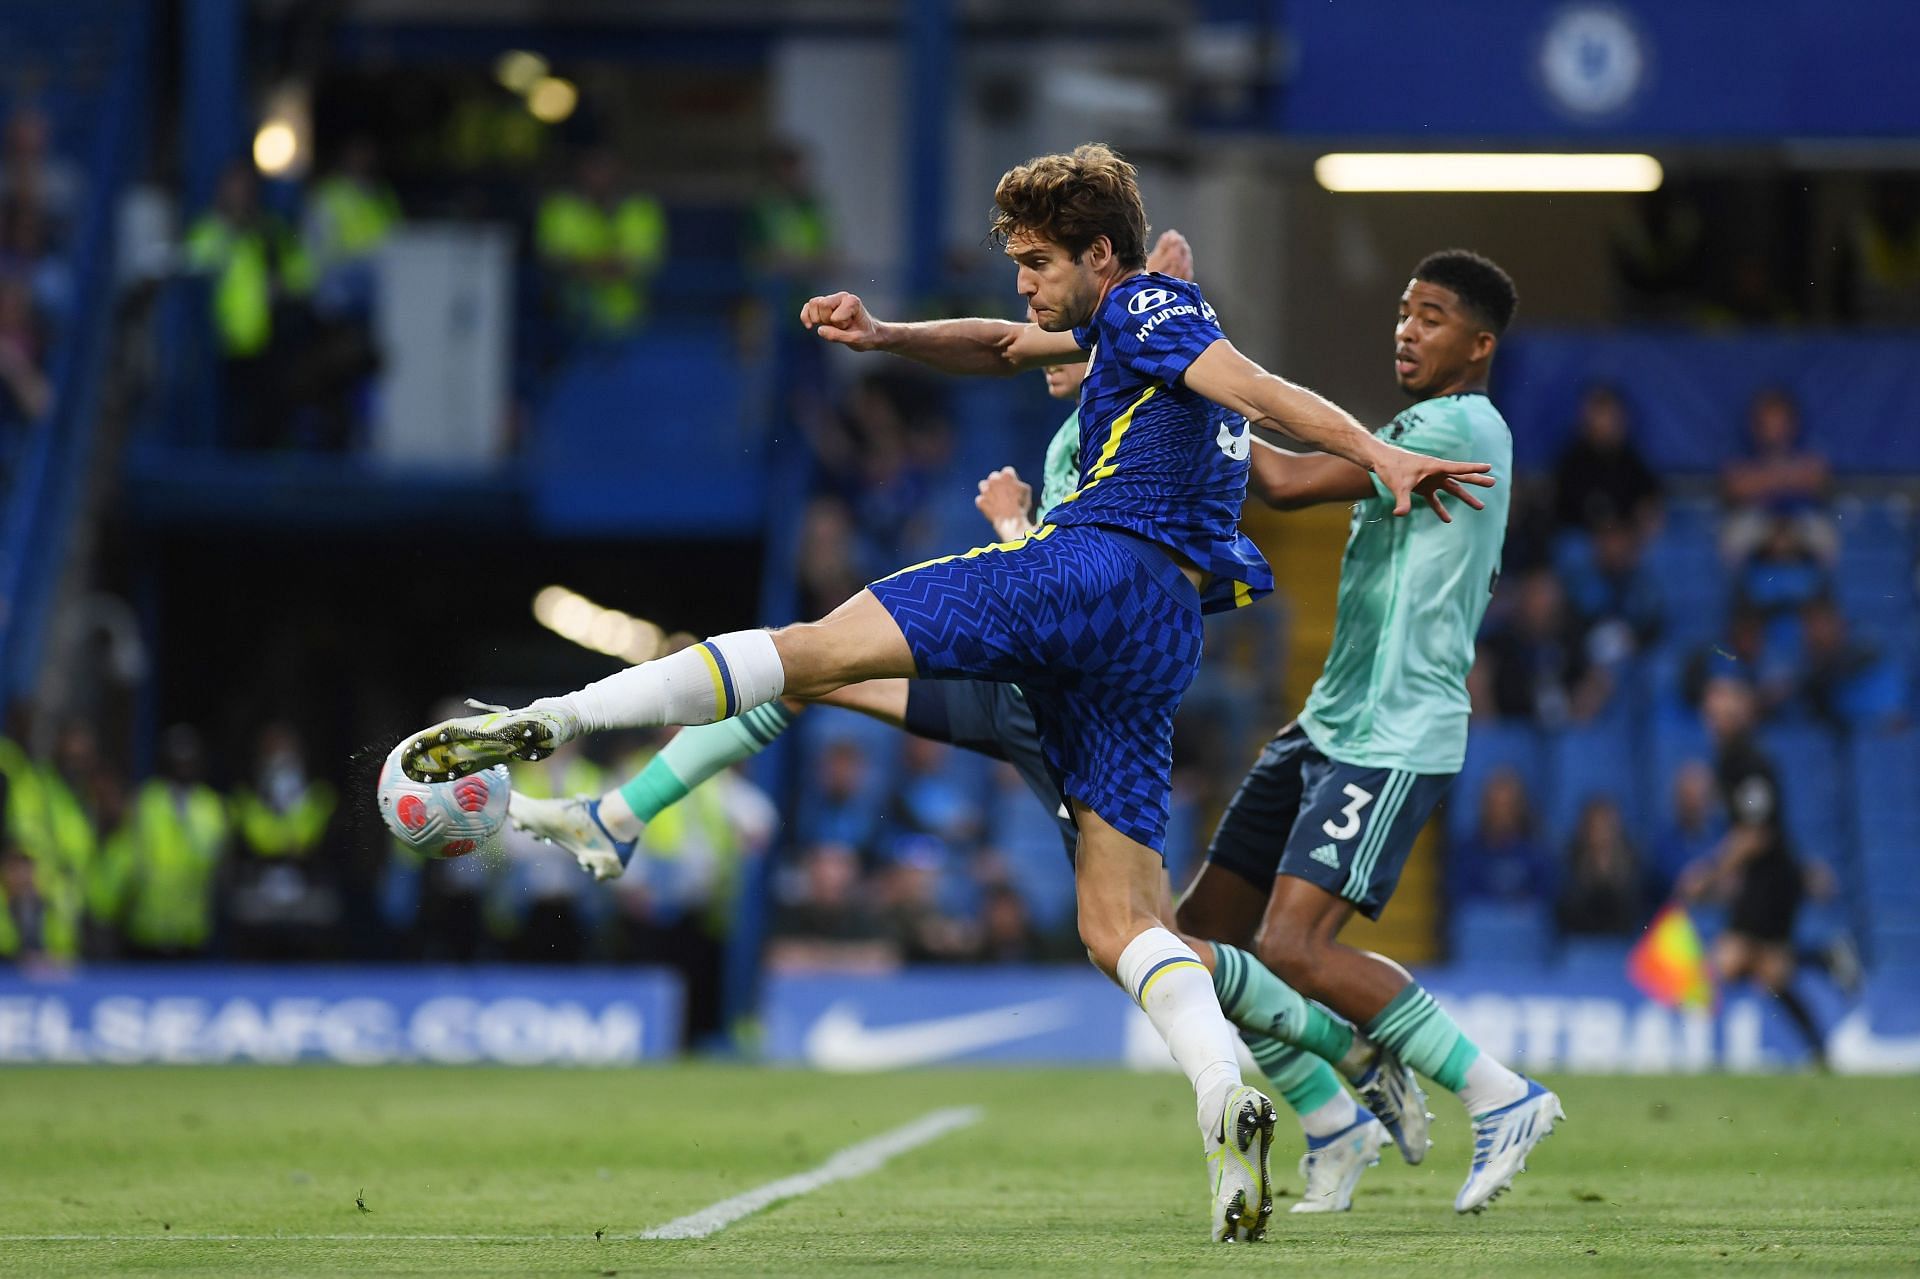 Marcos Alonso has a sweet left foot